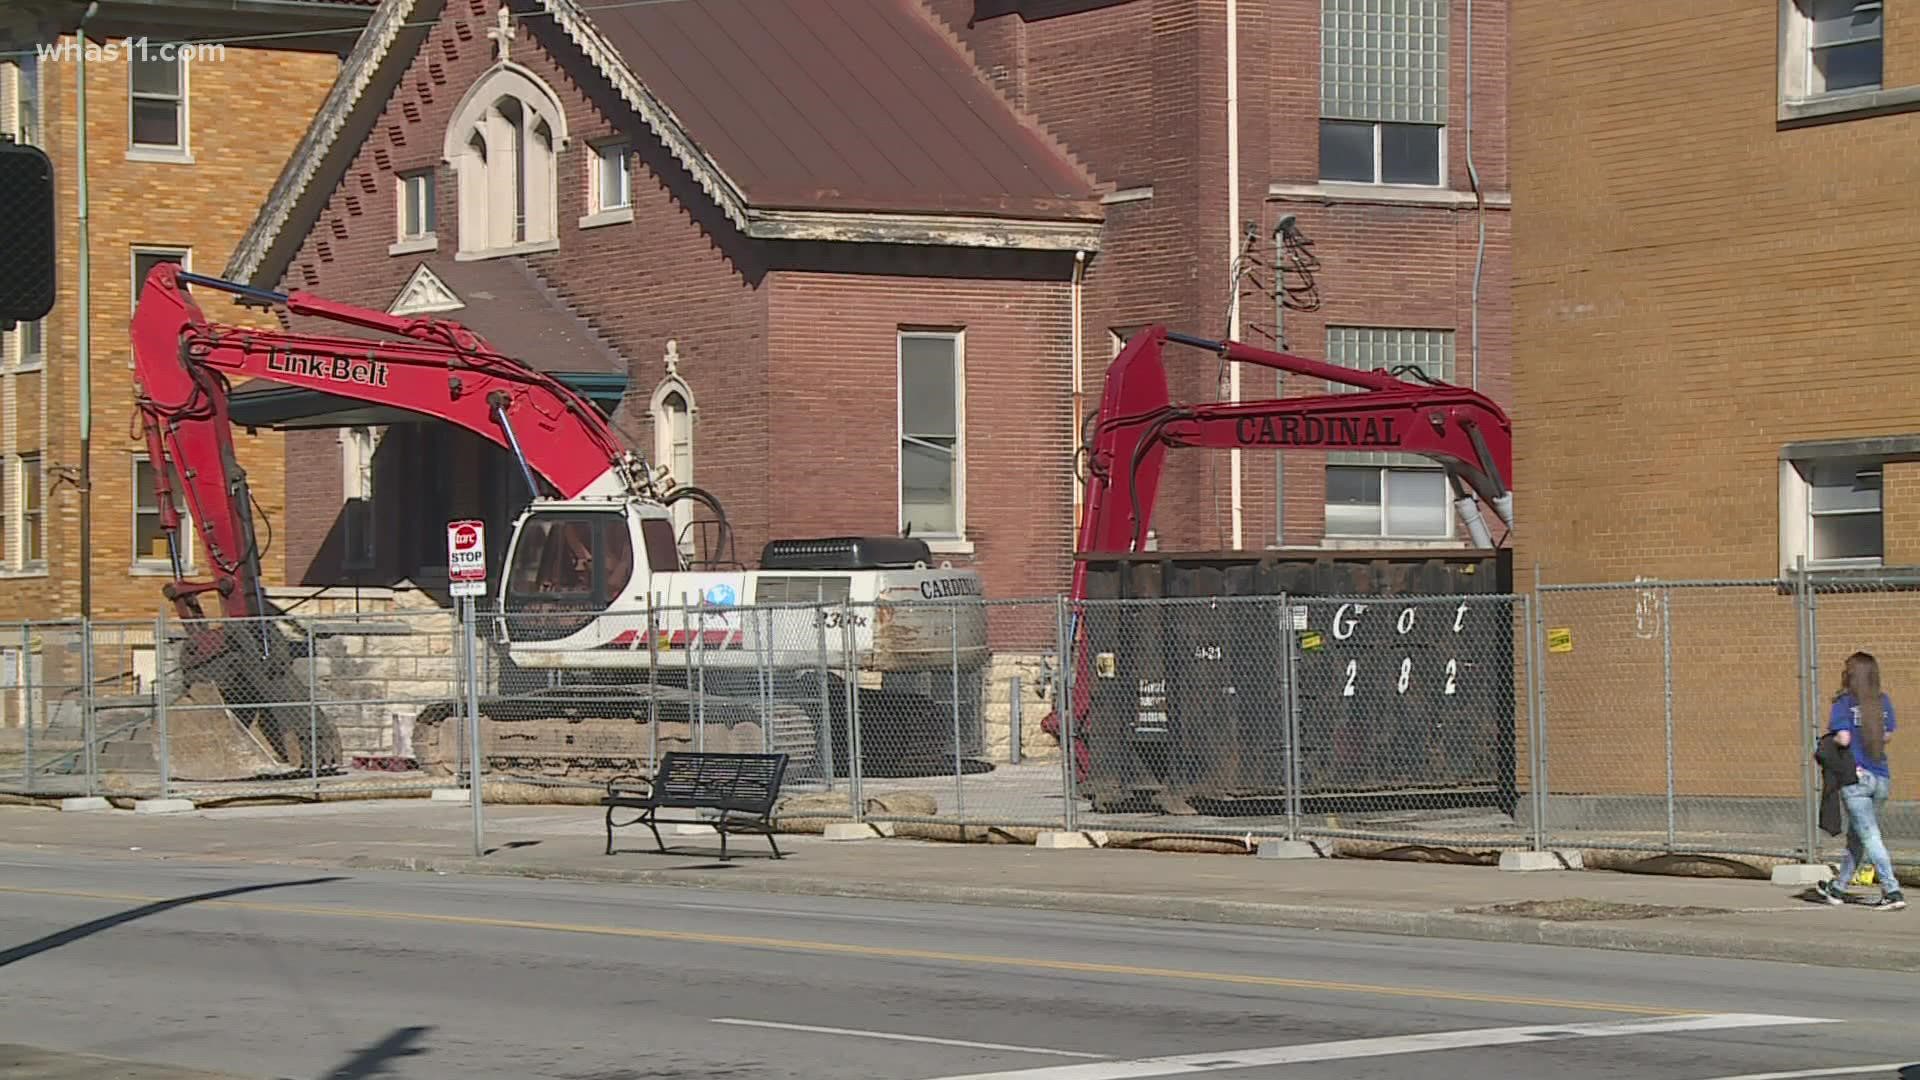 After legal battles and delays, construction is finally underway for their new headquarters in South Louisville.